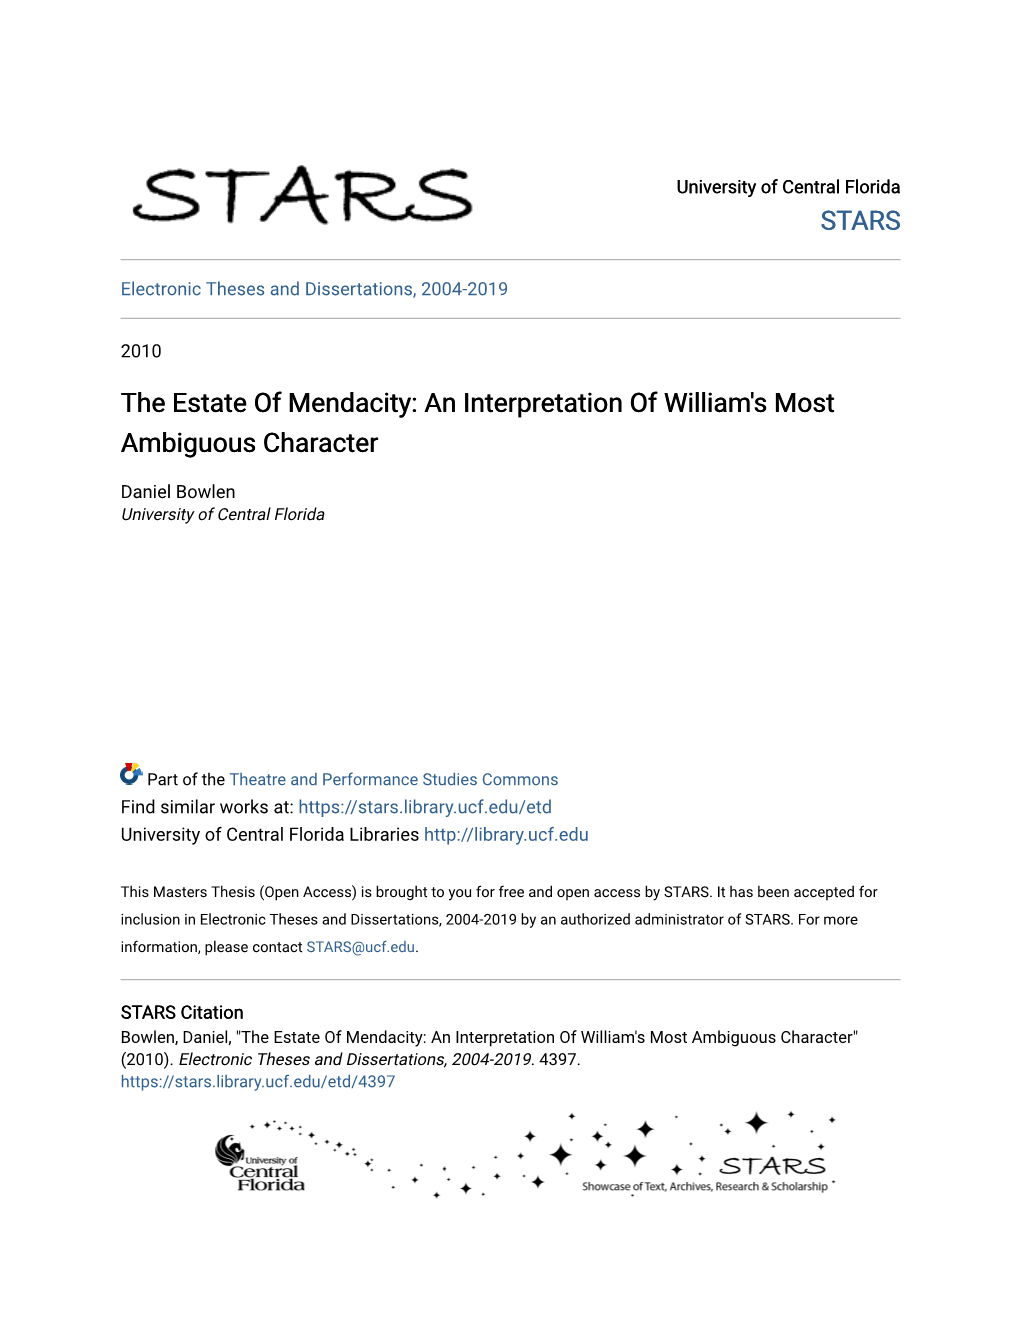 The Estate of Mendacity: an Interpretation of William's Most Ambiguous Character